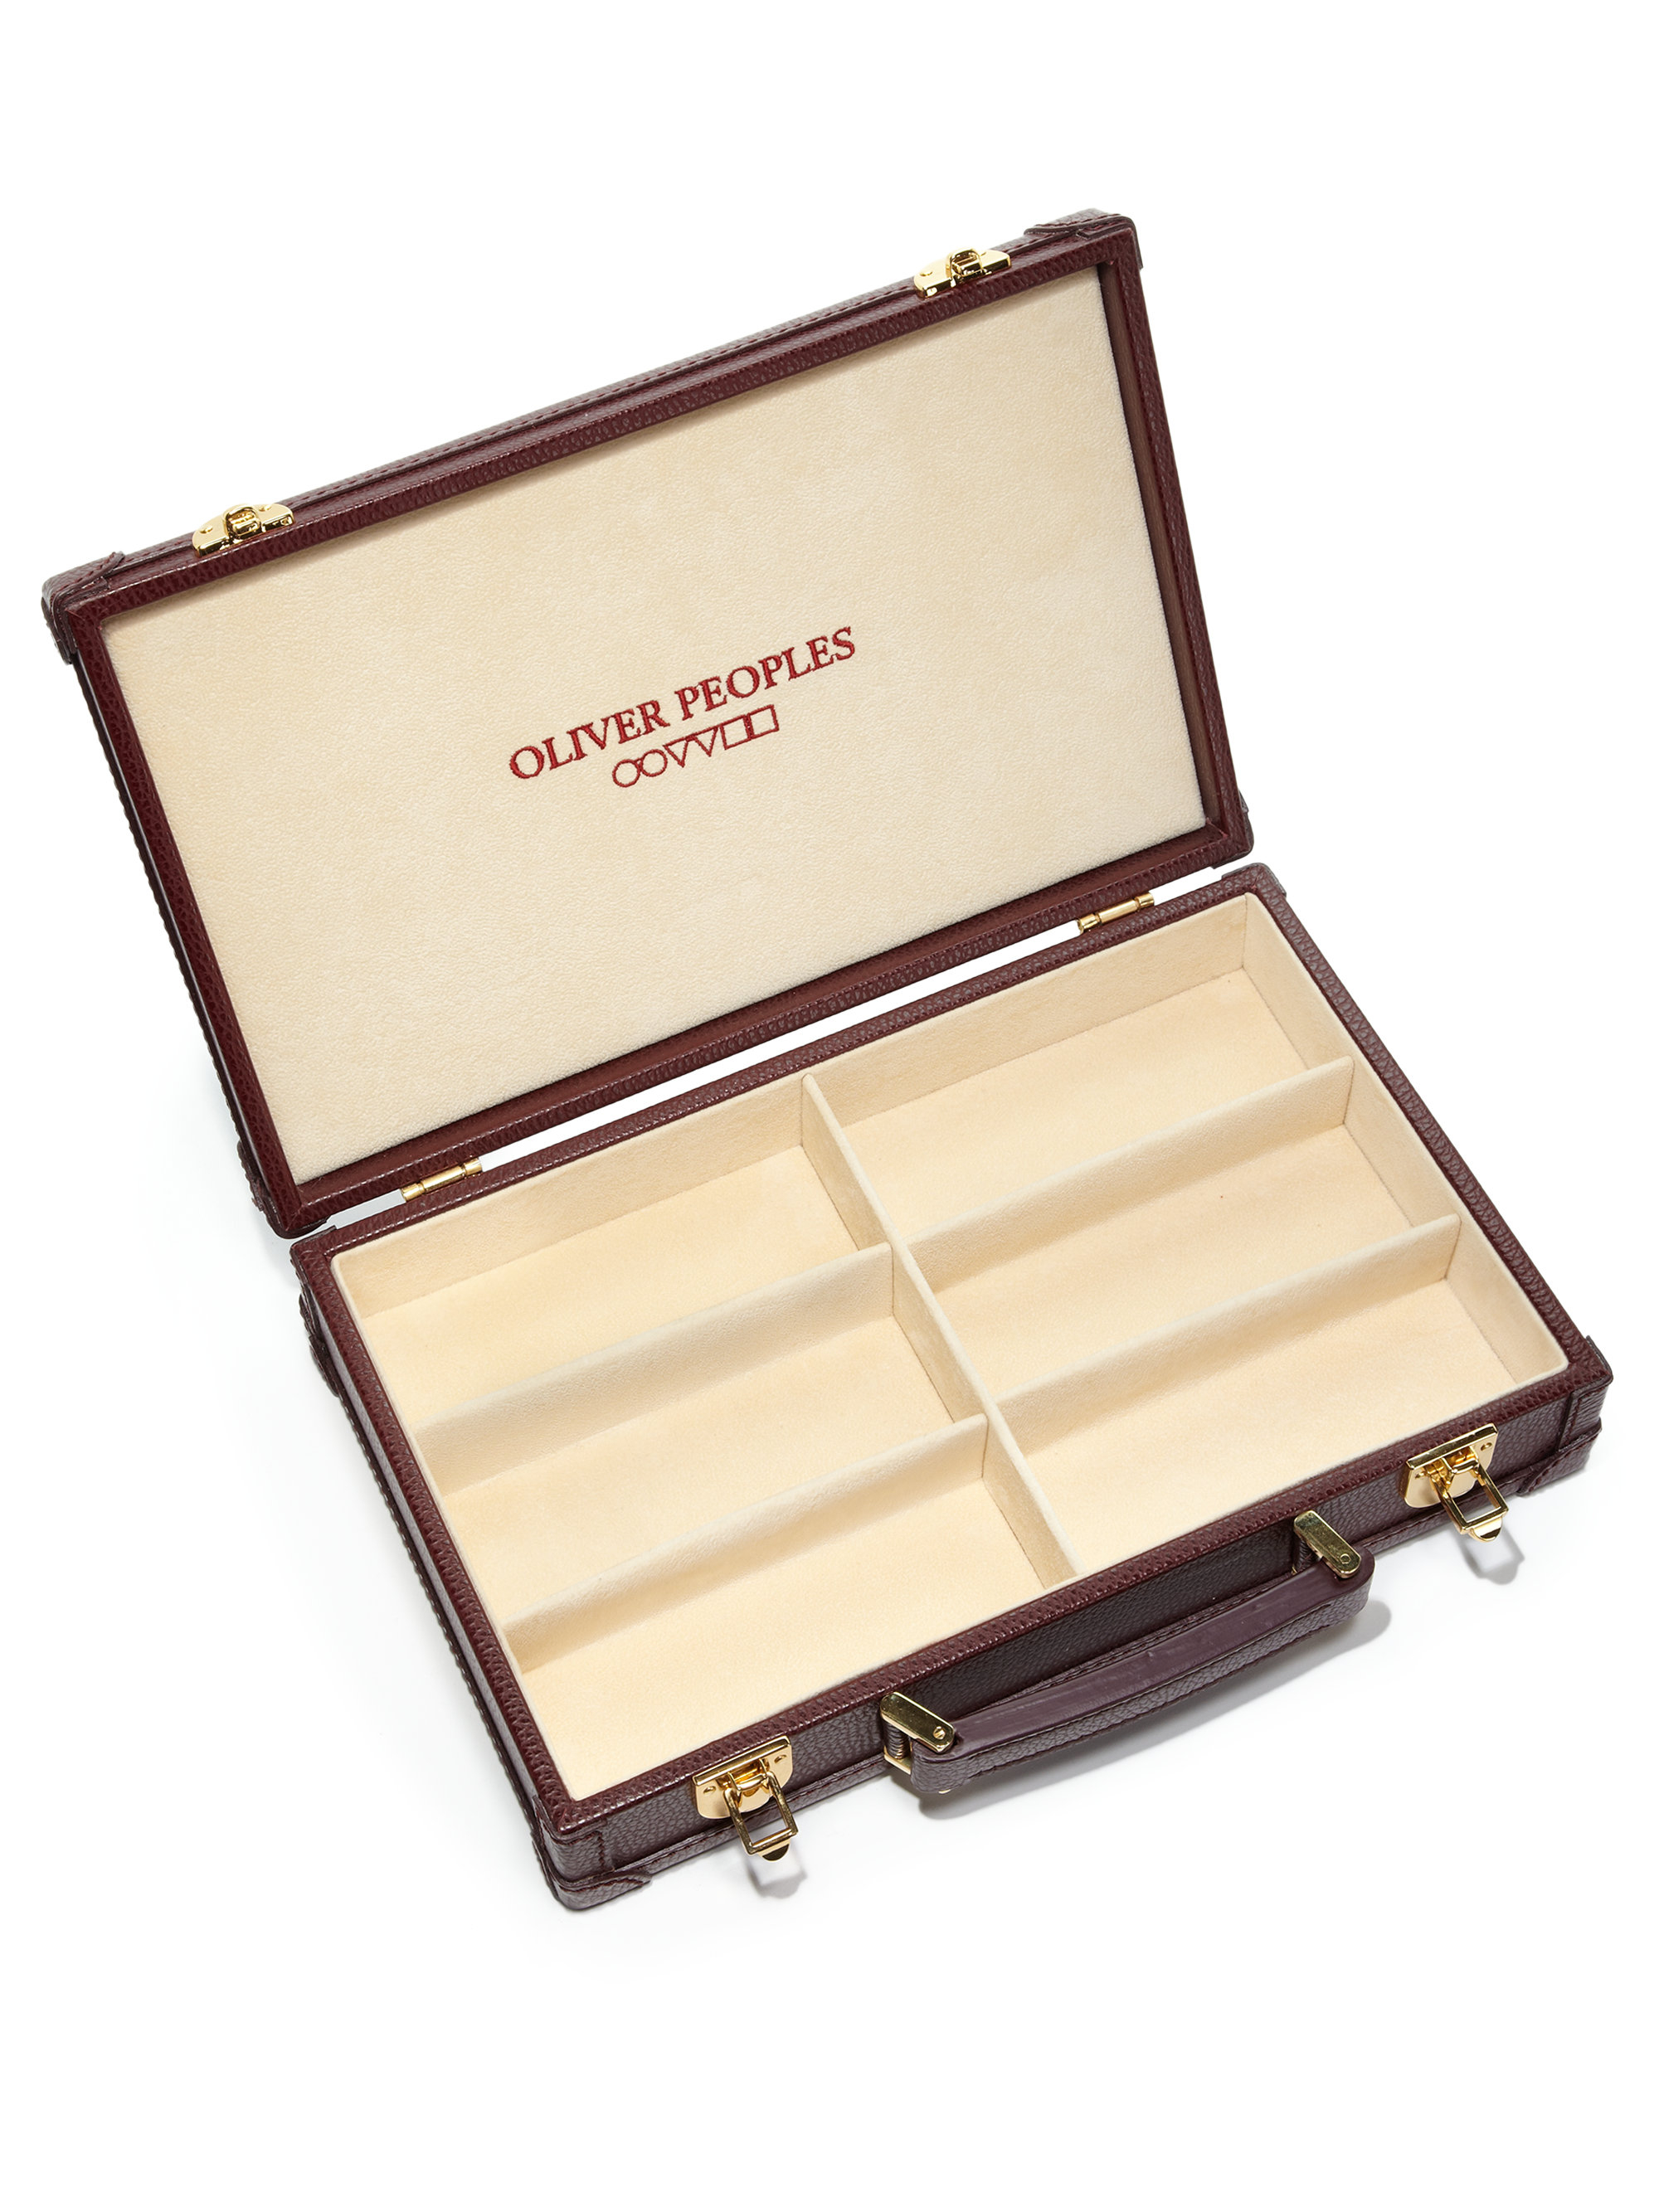 Lyst Oliver Peoples Leather Eyewear Trunk In Brown For Men 